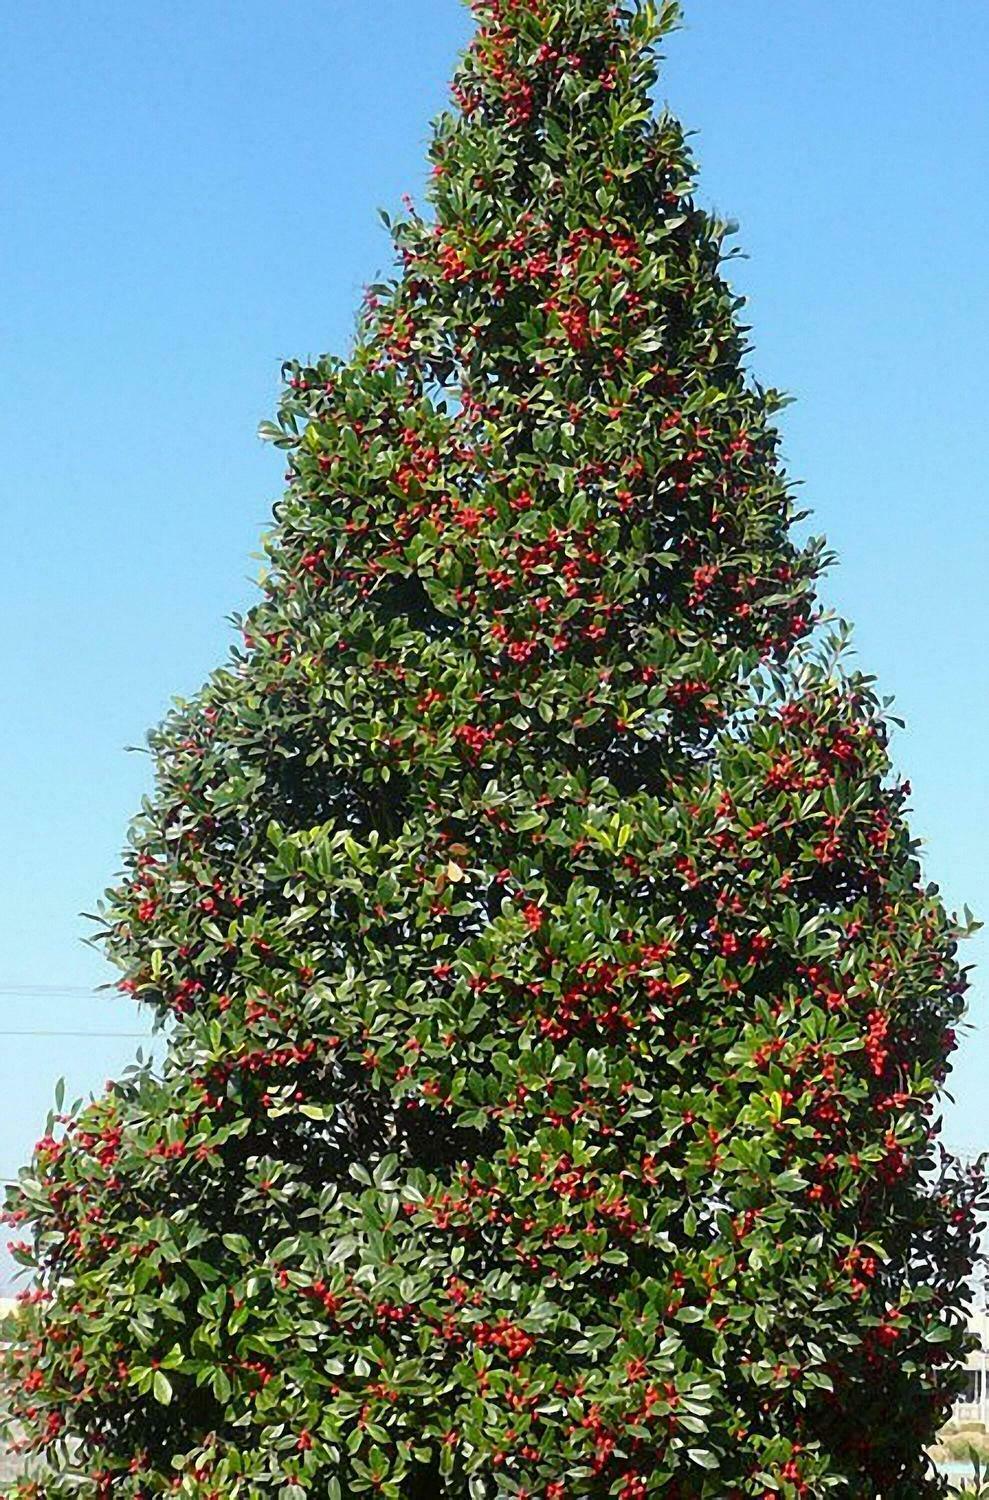 Foster Holly Shrub/Hedge - Live Potted Tree - 24-36" Tall Plant - Gallon Pot - The Nursery Center